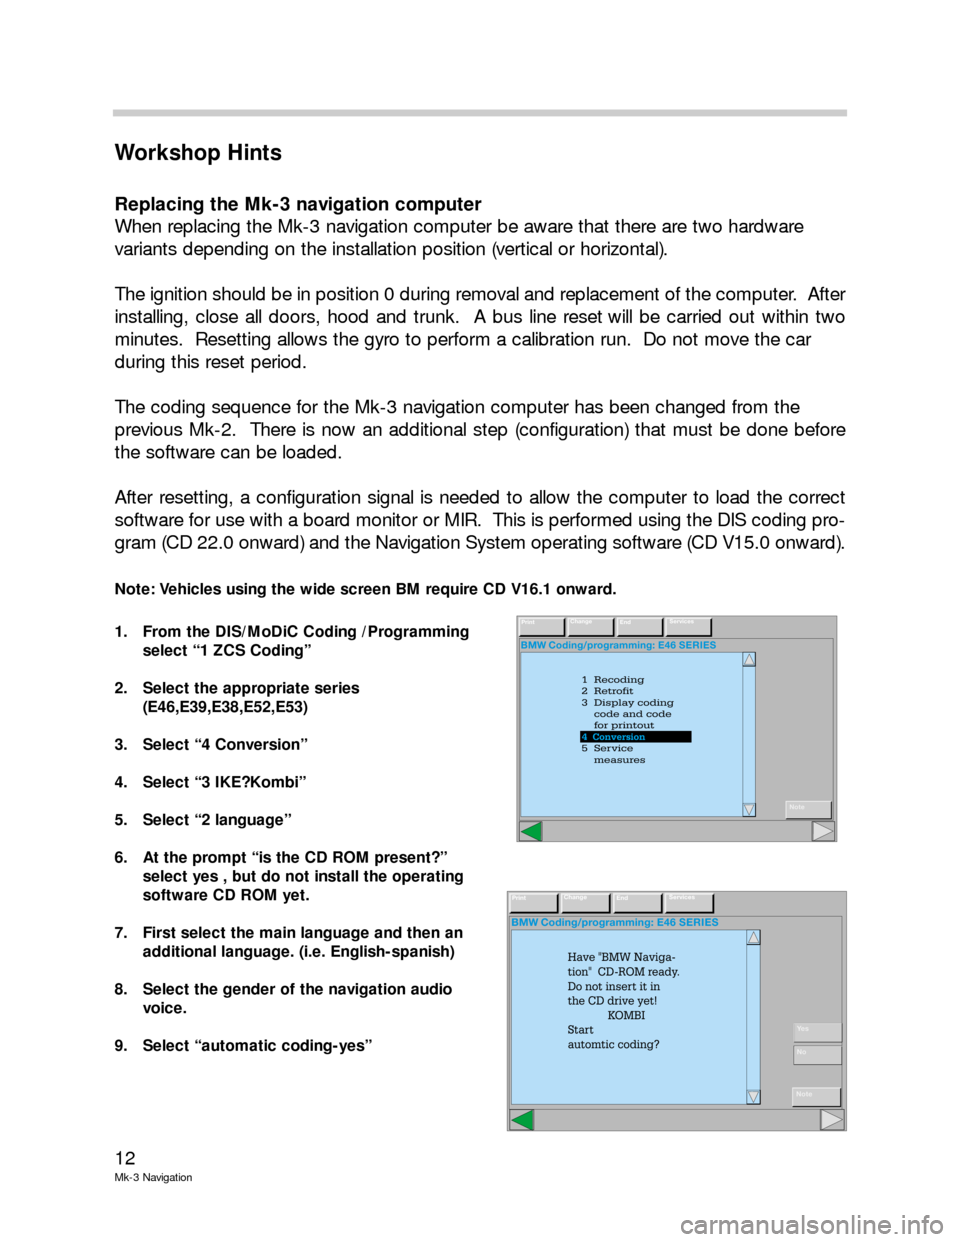 BMW 7 SERIES 2001 E38 Mk3 Navigation System Manual 12
Mk-3 Navigation
Workshop Hints
Replacing the Mk-3 navigation computer
When replacing the Mk-3 navigation computer be aware that there are two hardware 
variants depending on the installation positi